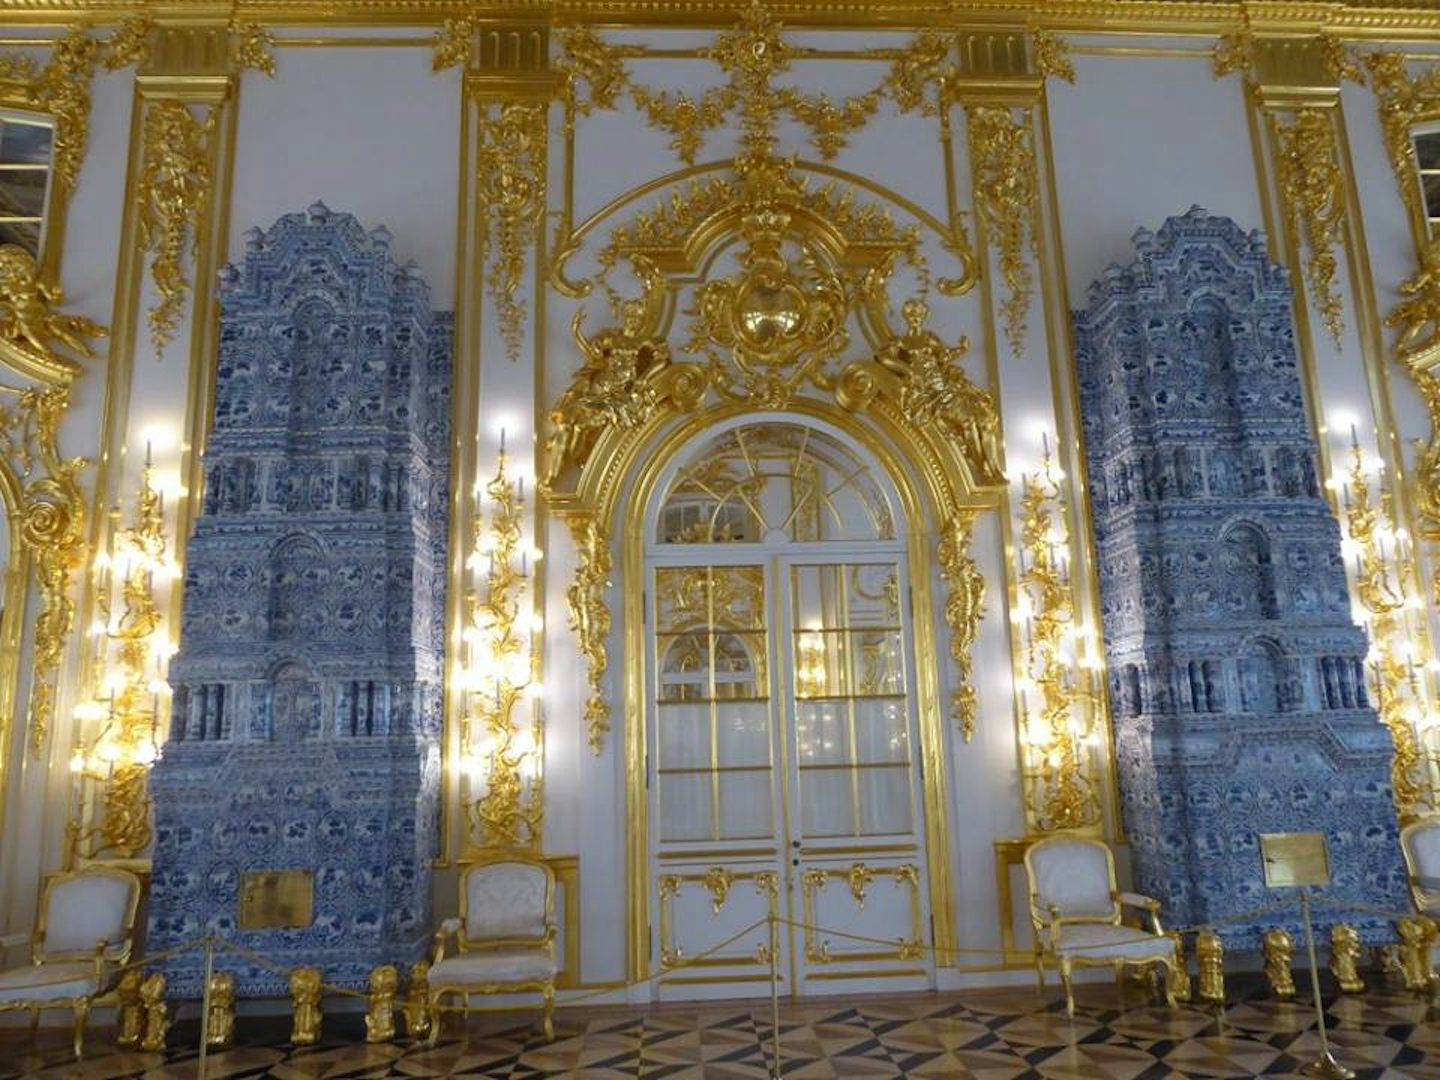 Catherine's Palace.  This was being built while Russians were starving.